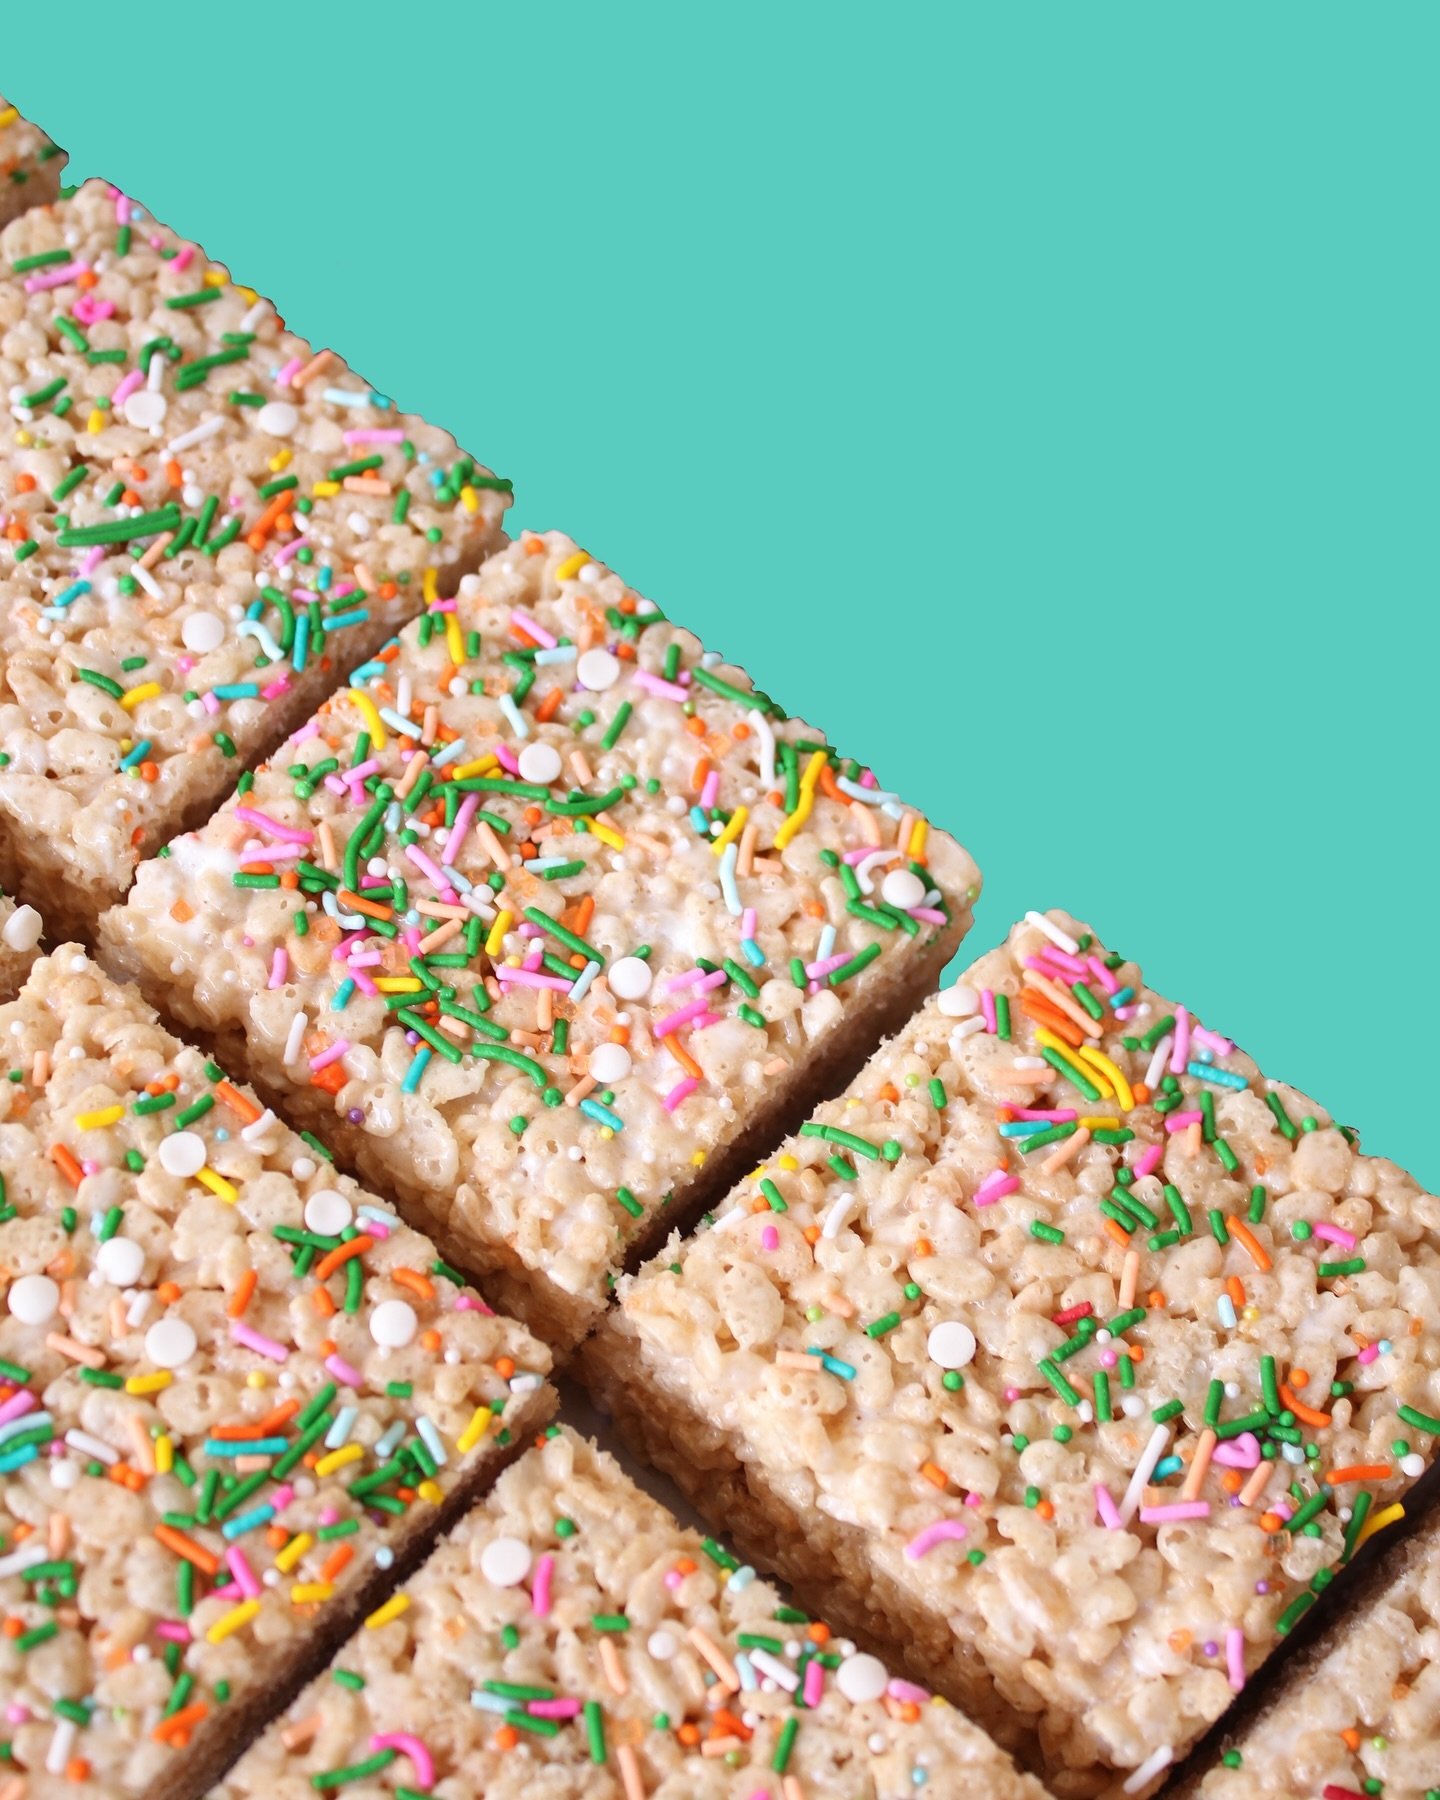 Colorful, crispy, &amp; delicious! A treat no one can resist! Krispies are back in stock on our ordering site for same day pickup ⚡️🌈